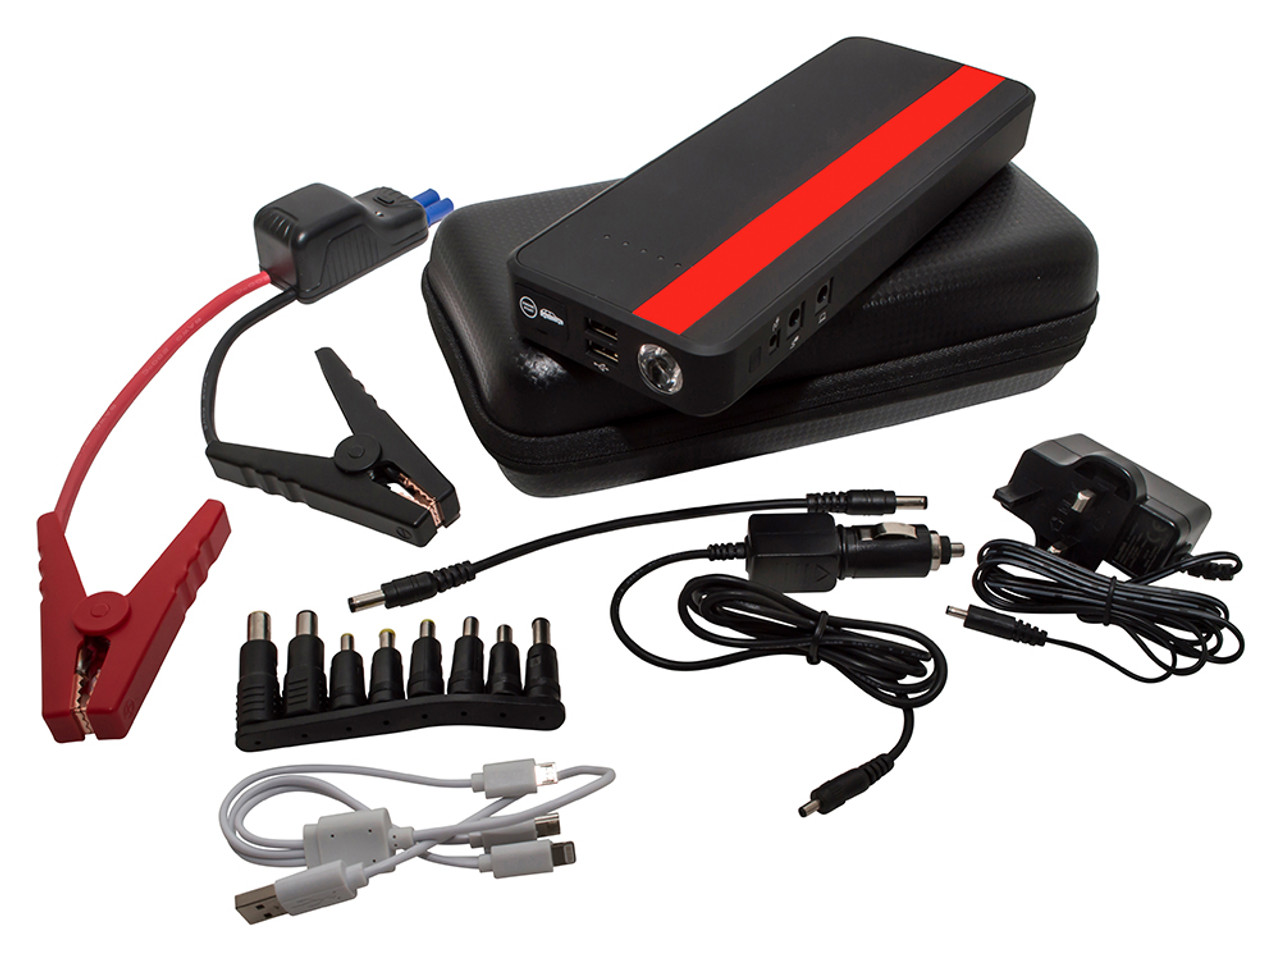 Car Battery Jump Starter Portable Auto Car Emergency Starting Power Supply Fast Charging on Board Spare Multi Port Mobile Power Portable Type 